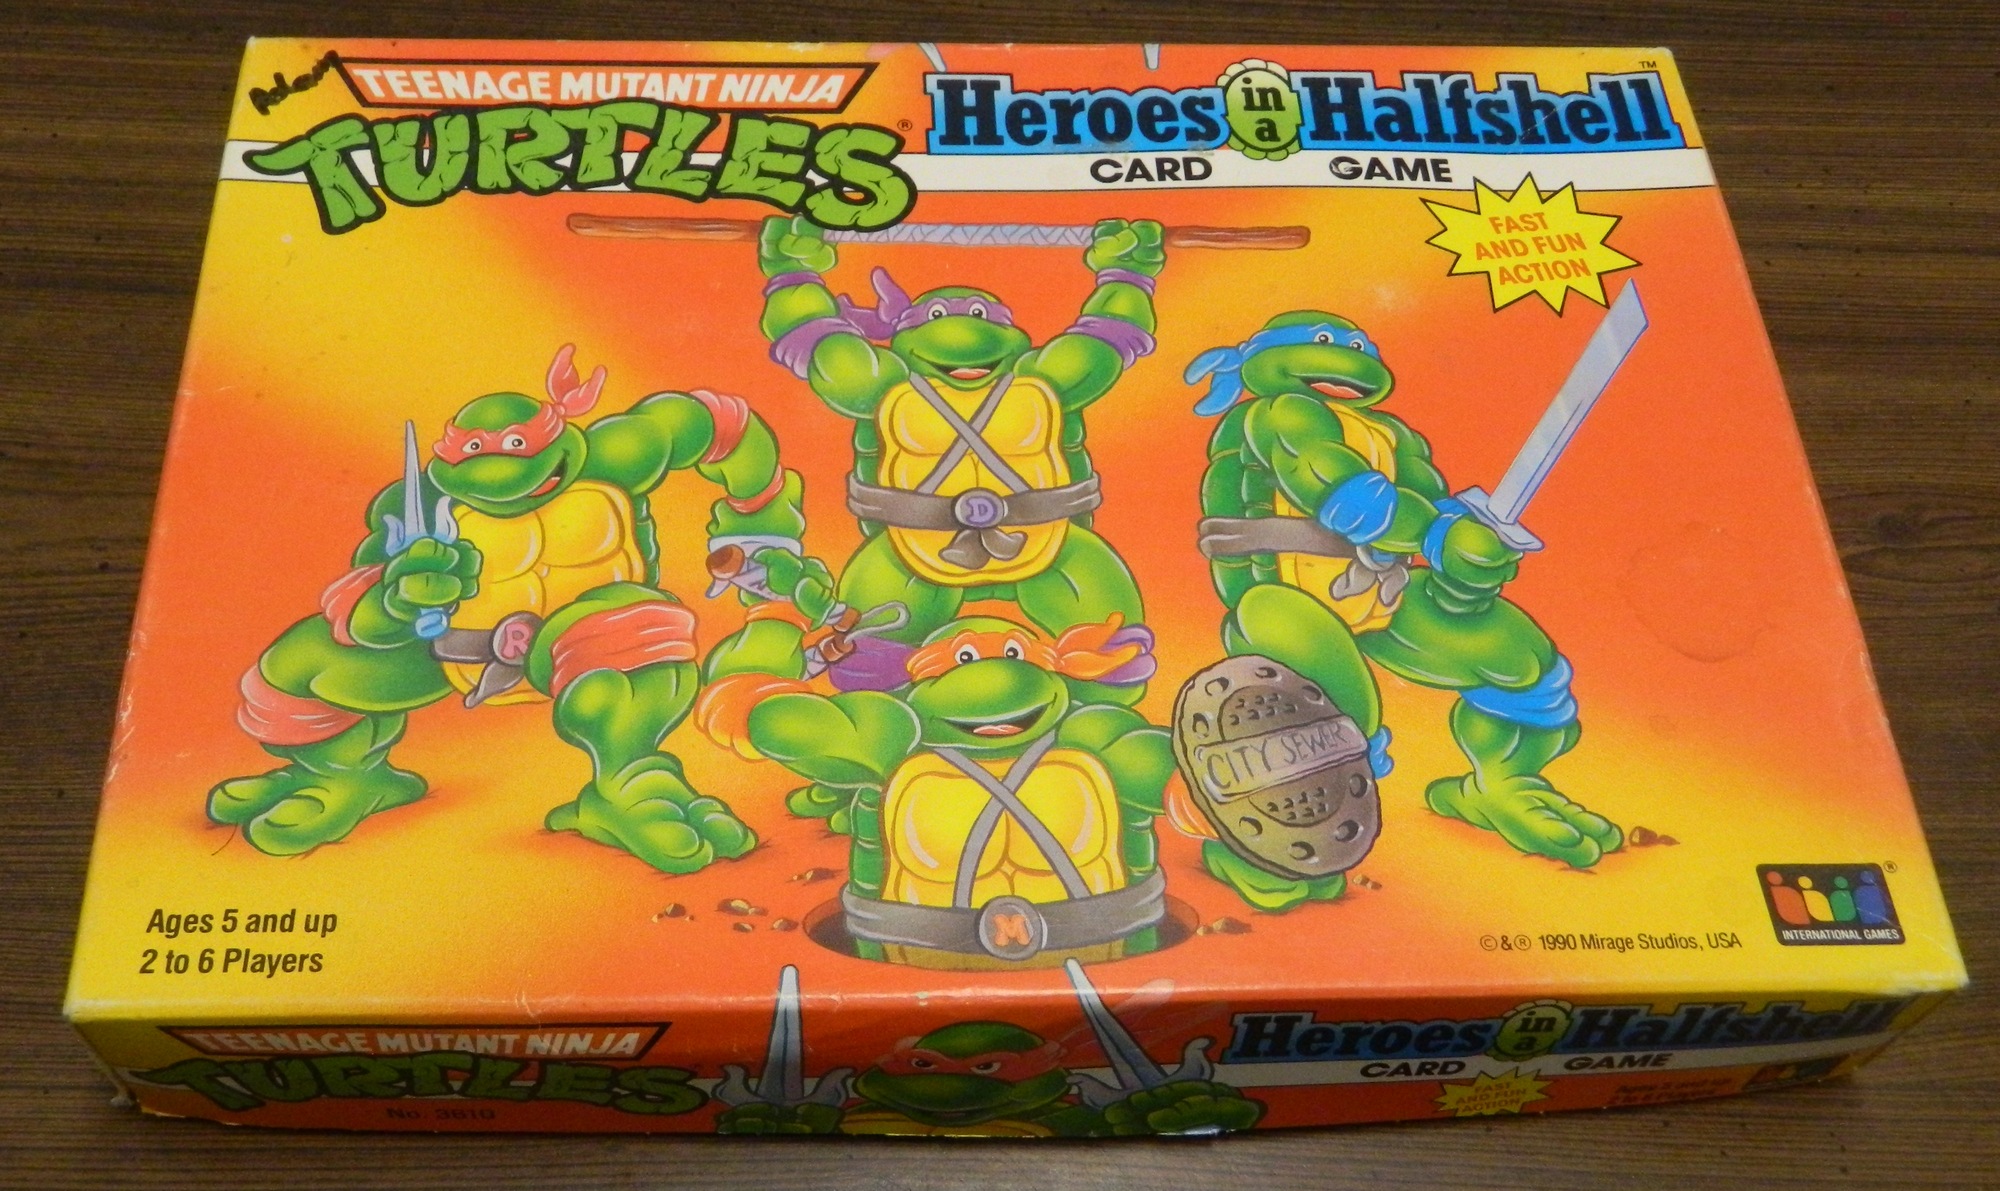 Teenage Mutant Ninja Turtles Heroes in a Halfshell Card Game Review and Rules